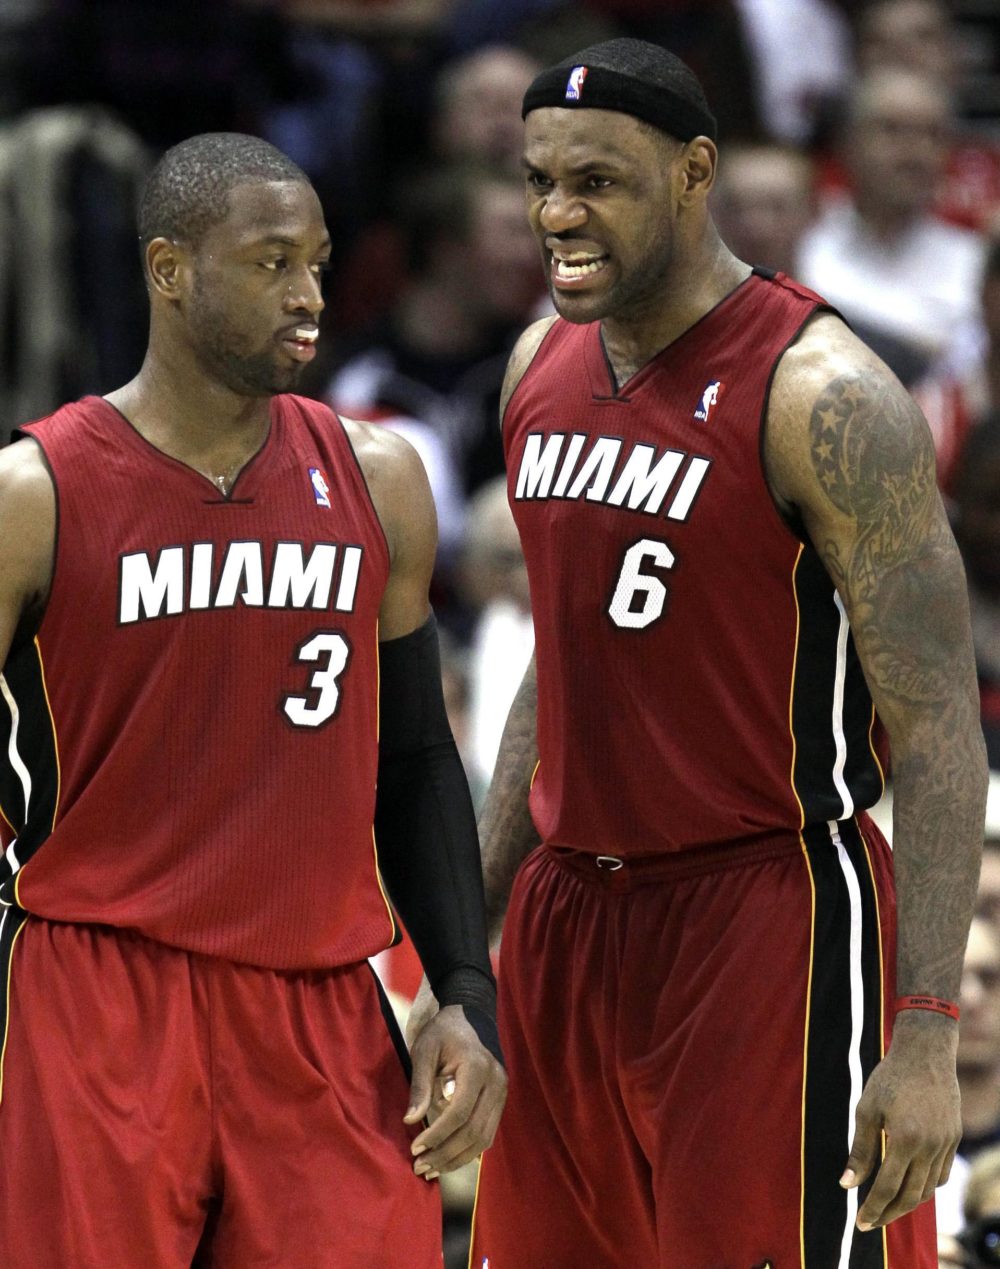 Dwyane Wade (3) and LeBron James (6) have the Heat heading in the right direction in Miami. Can they get past Boston and Orlando in the NBA&#039;s Eastern Conference? (AP Photo/David J. Phillip)